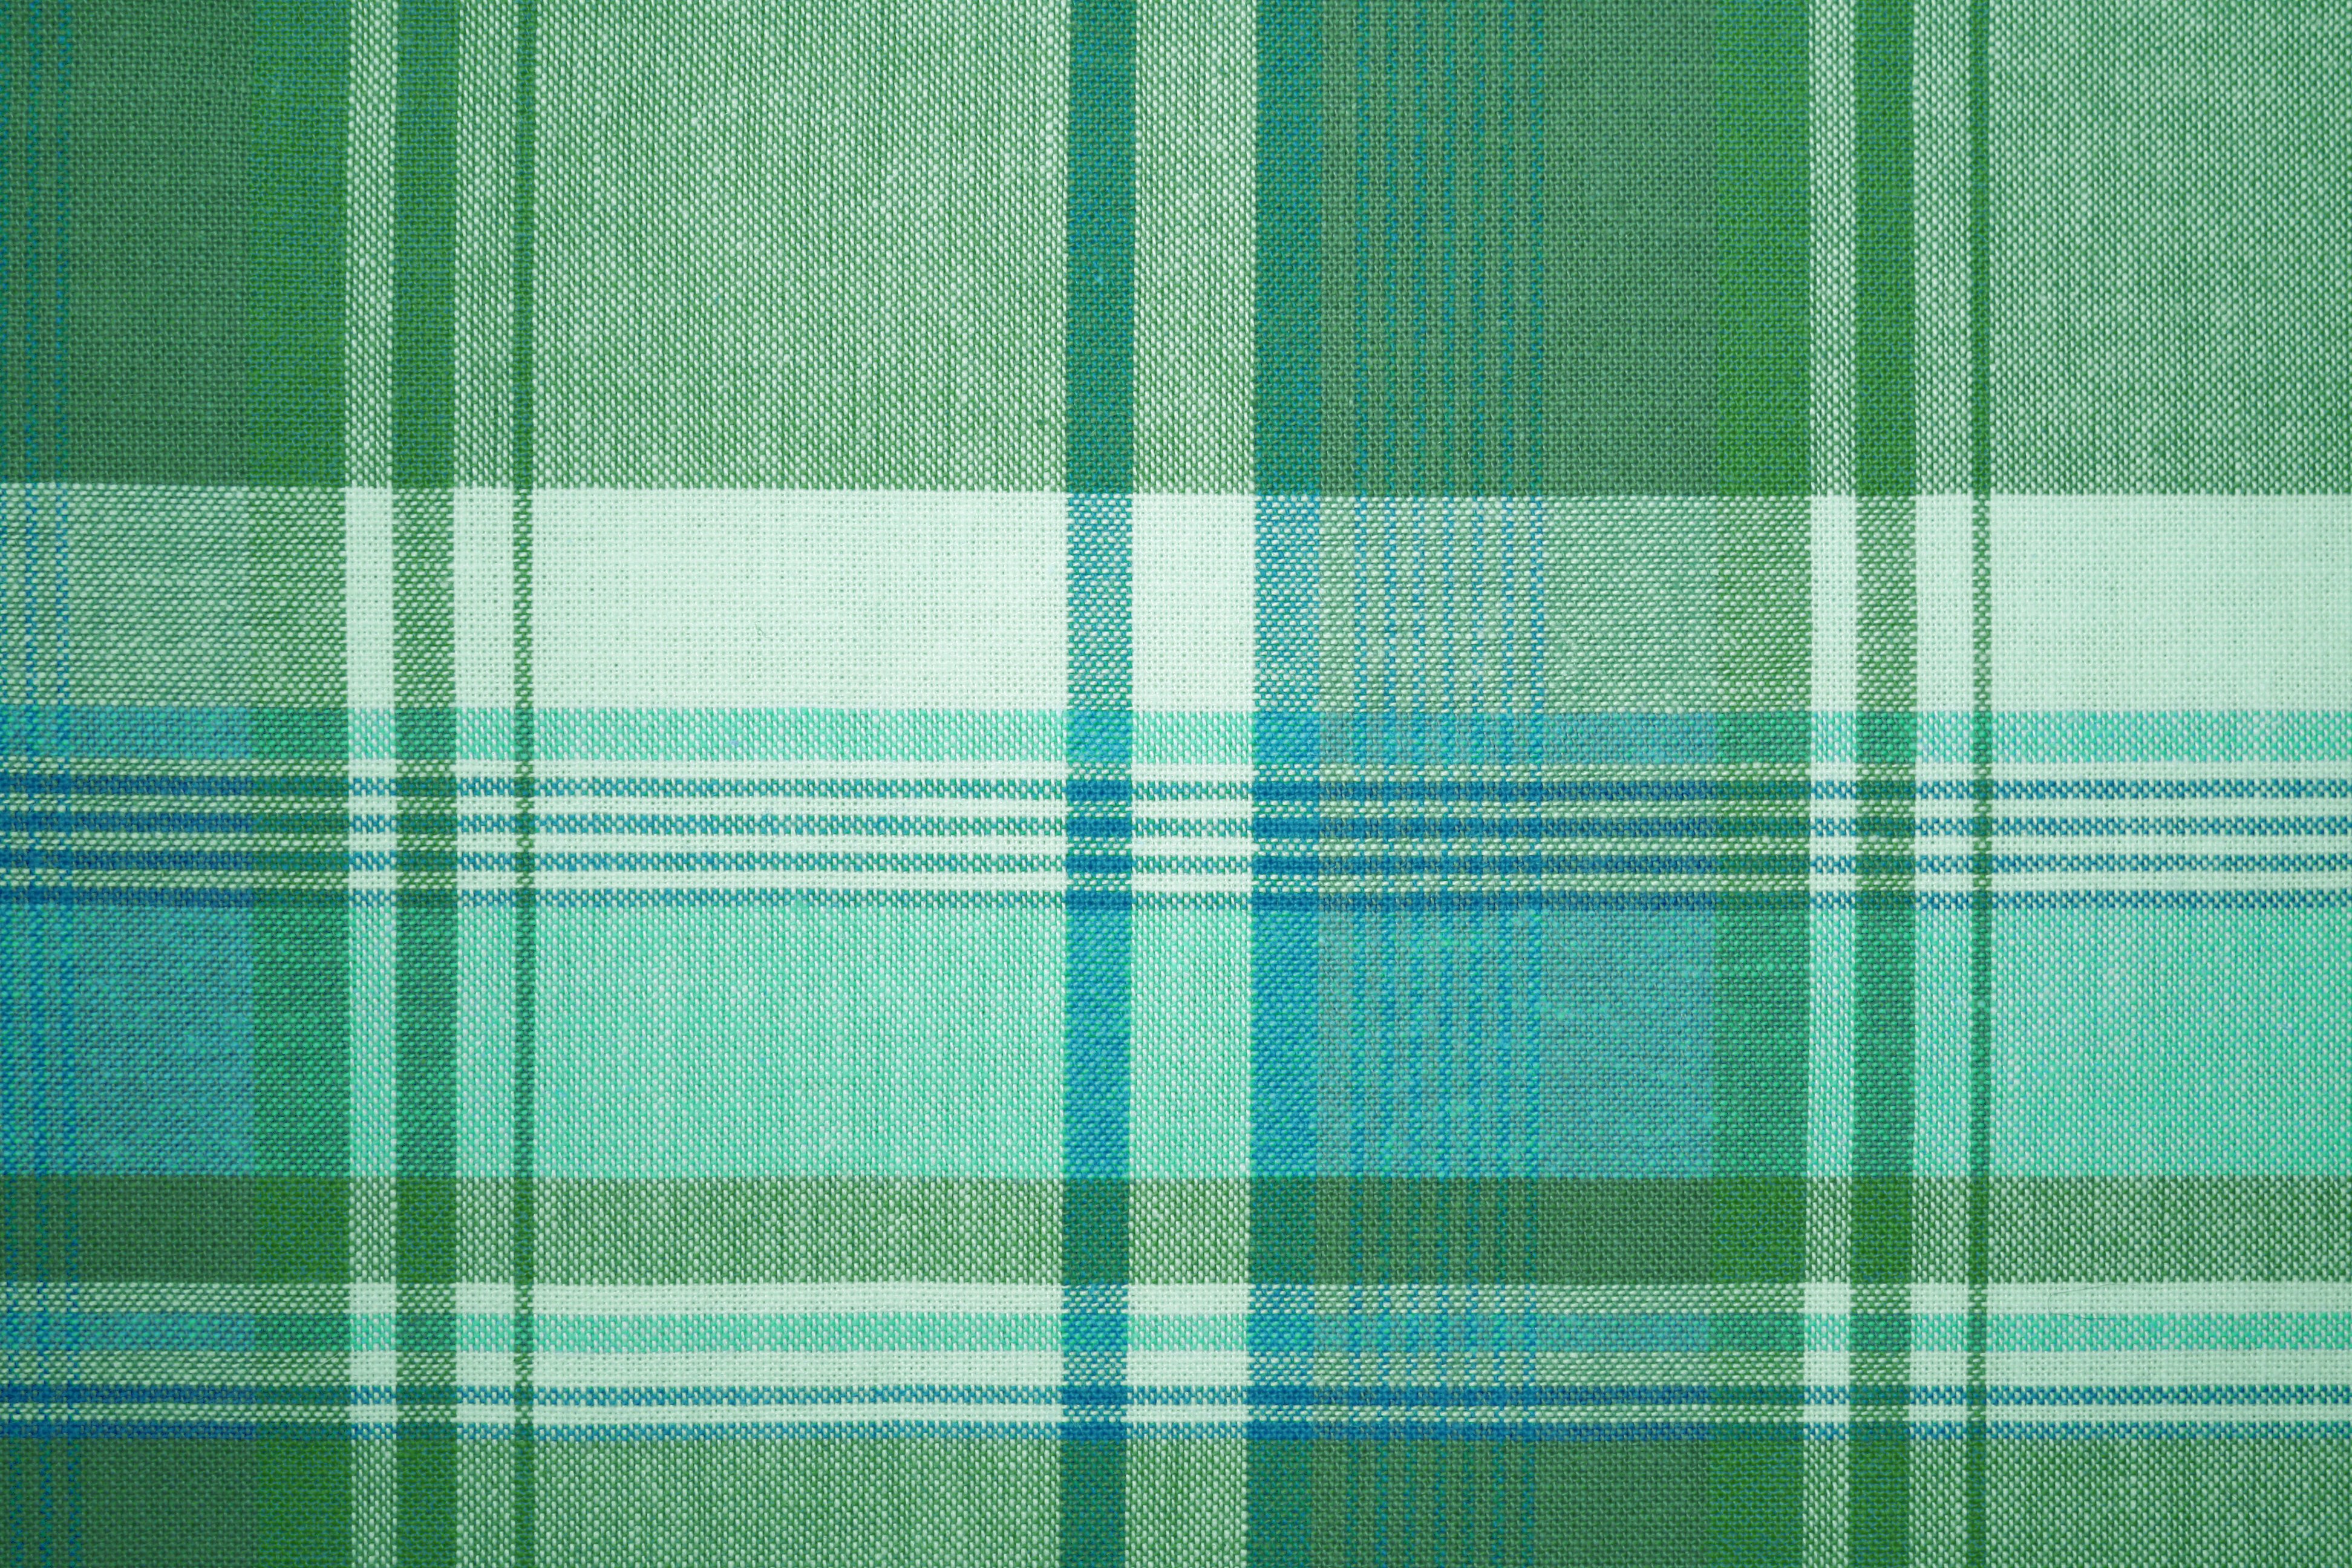 Green and Turquoise Plaid Fabric Texture Picture Free Photograph